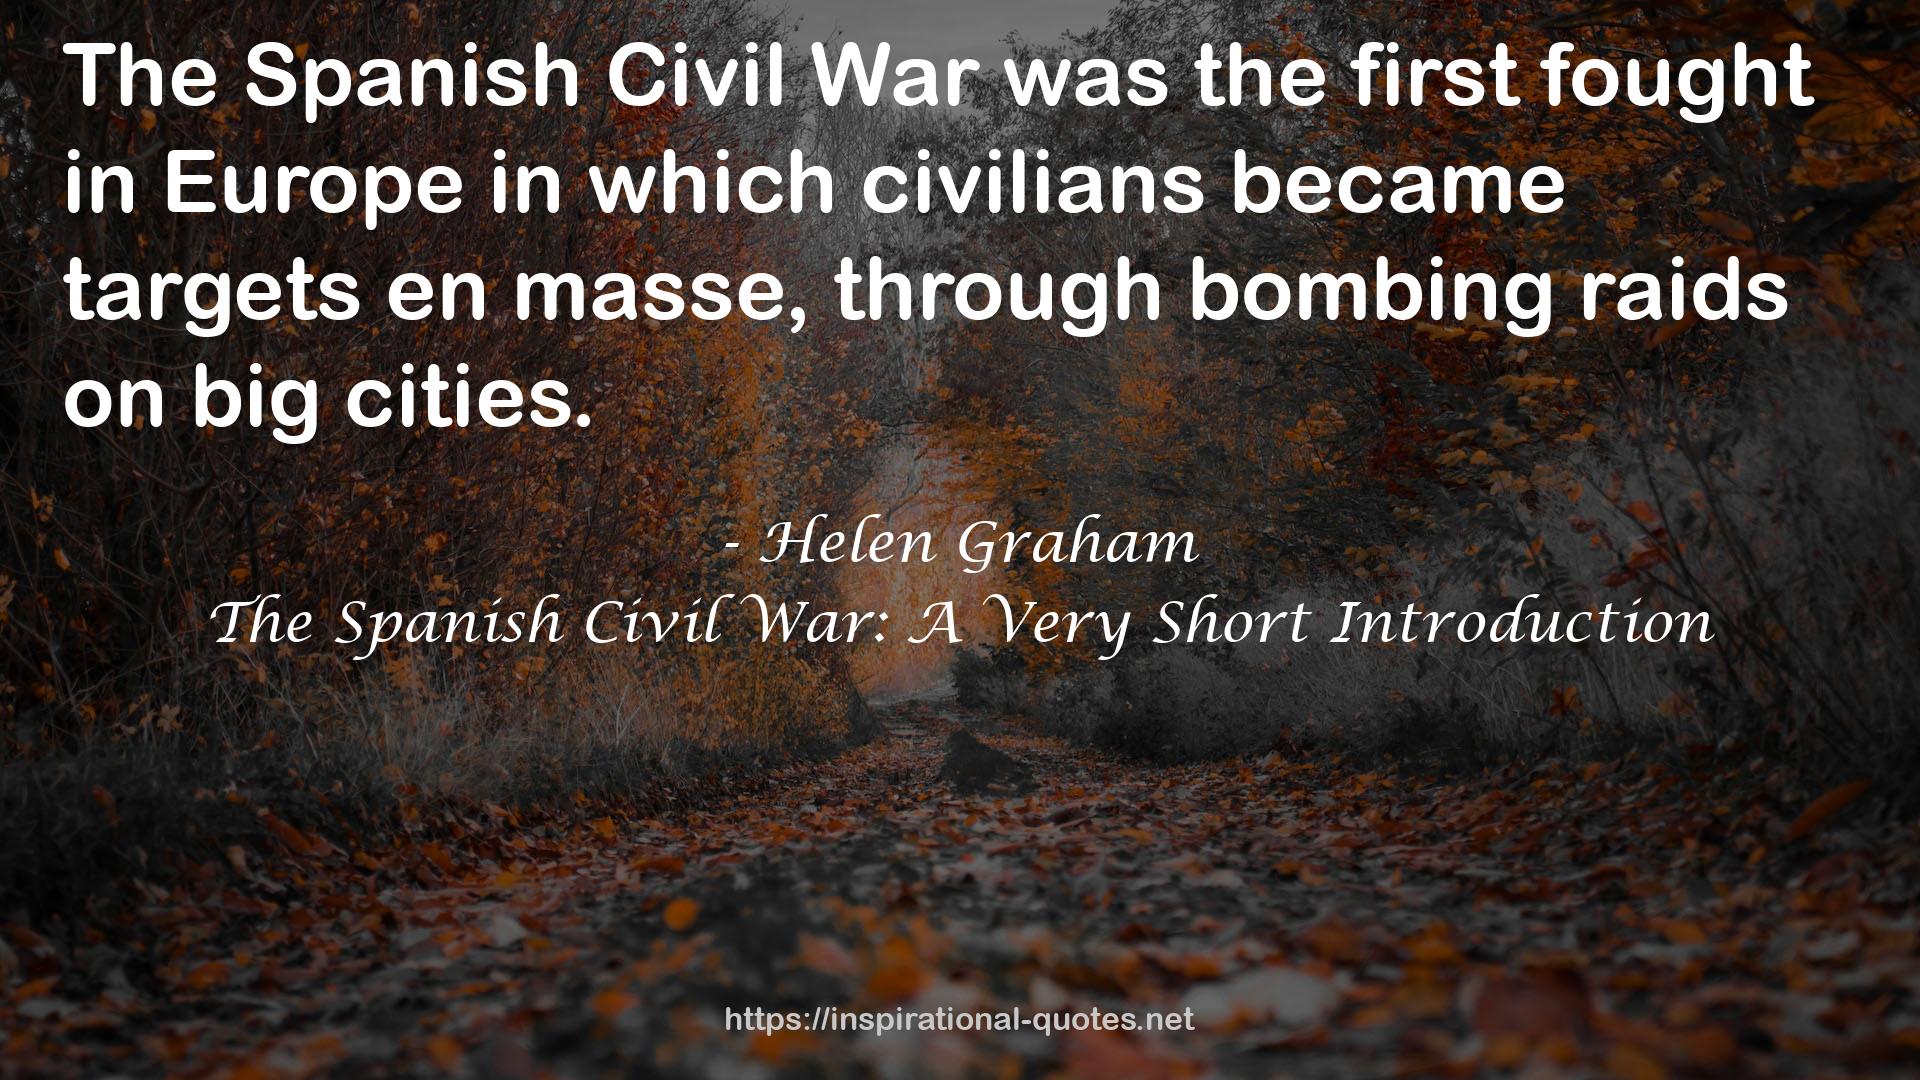 The Spanish Civil War: A Very Short Introduction QUOTES